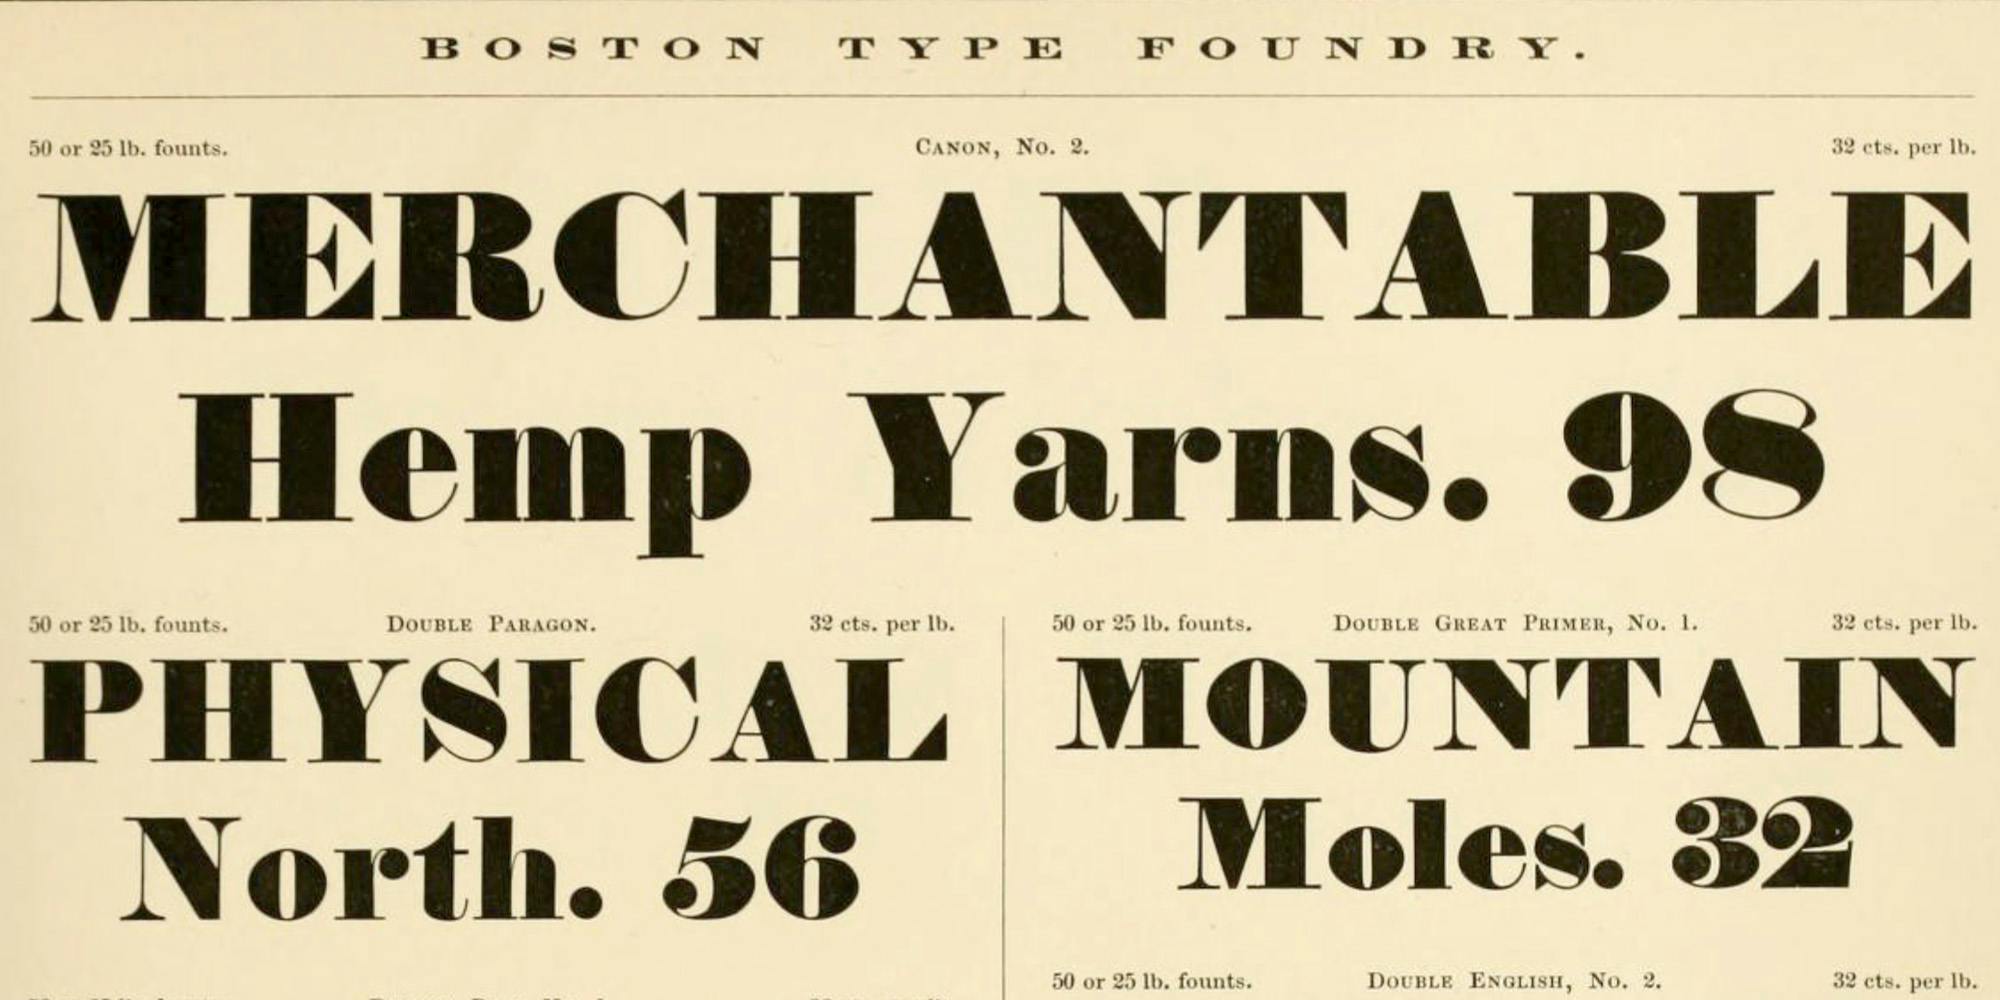 Fat Face typeface example from the Boston Type Foundry, Canon No.2